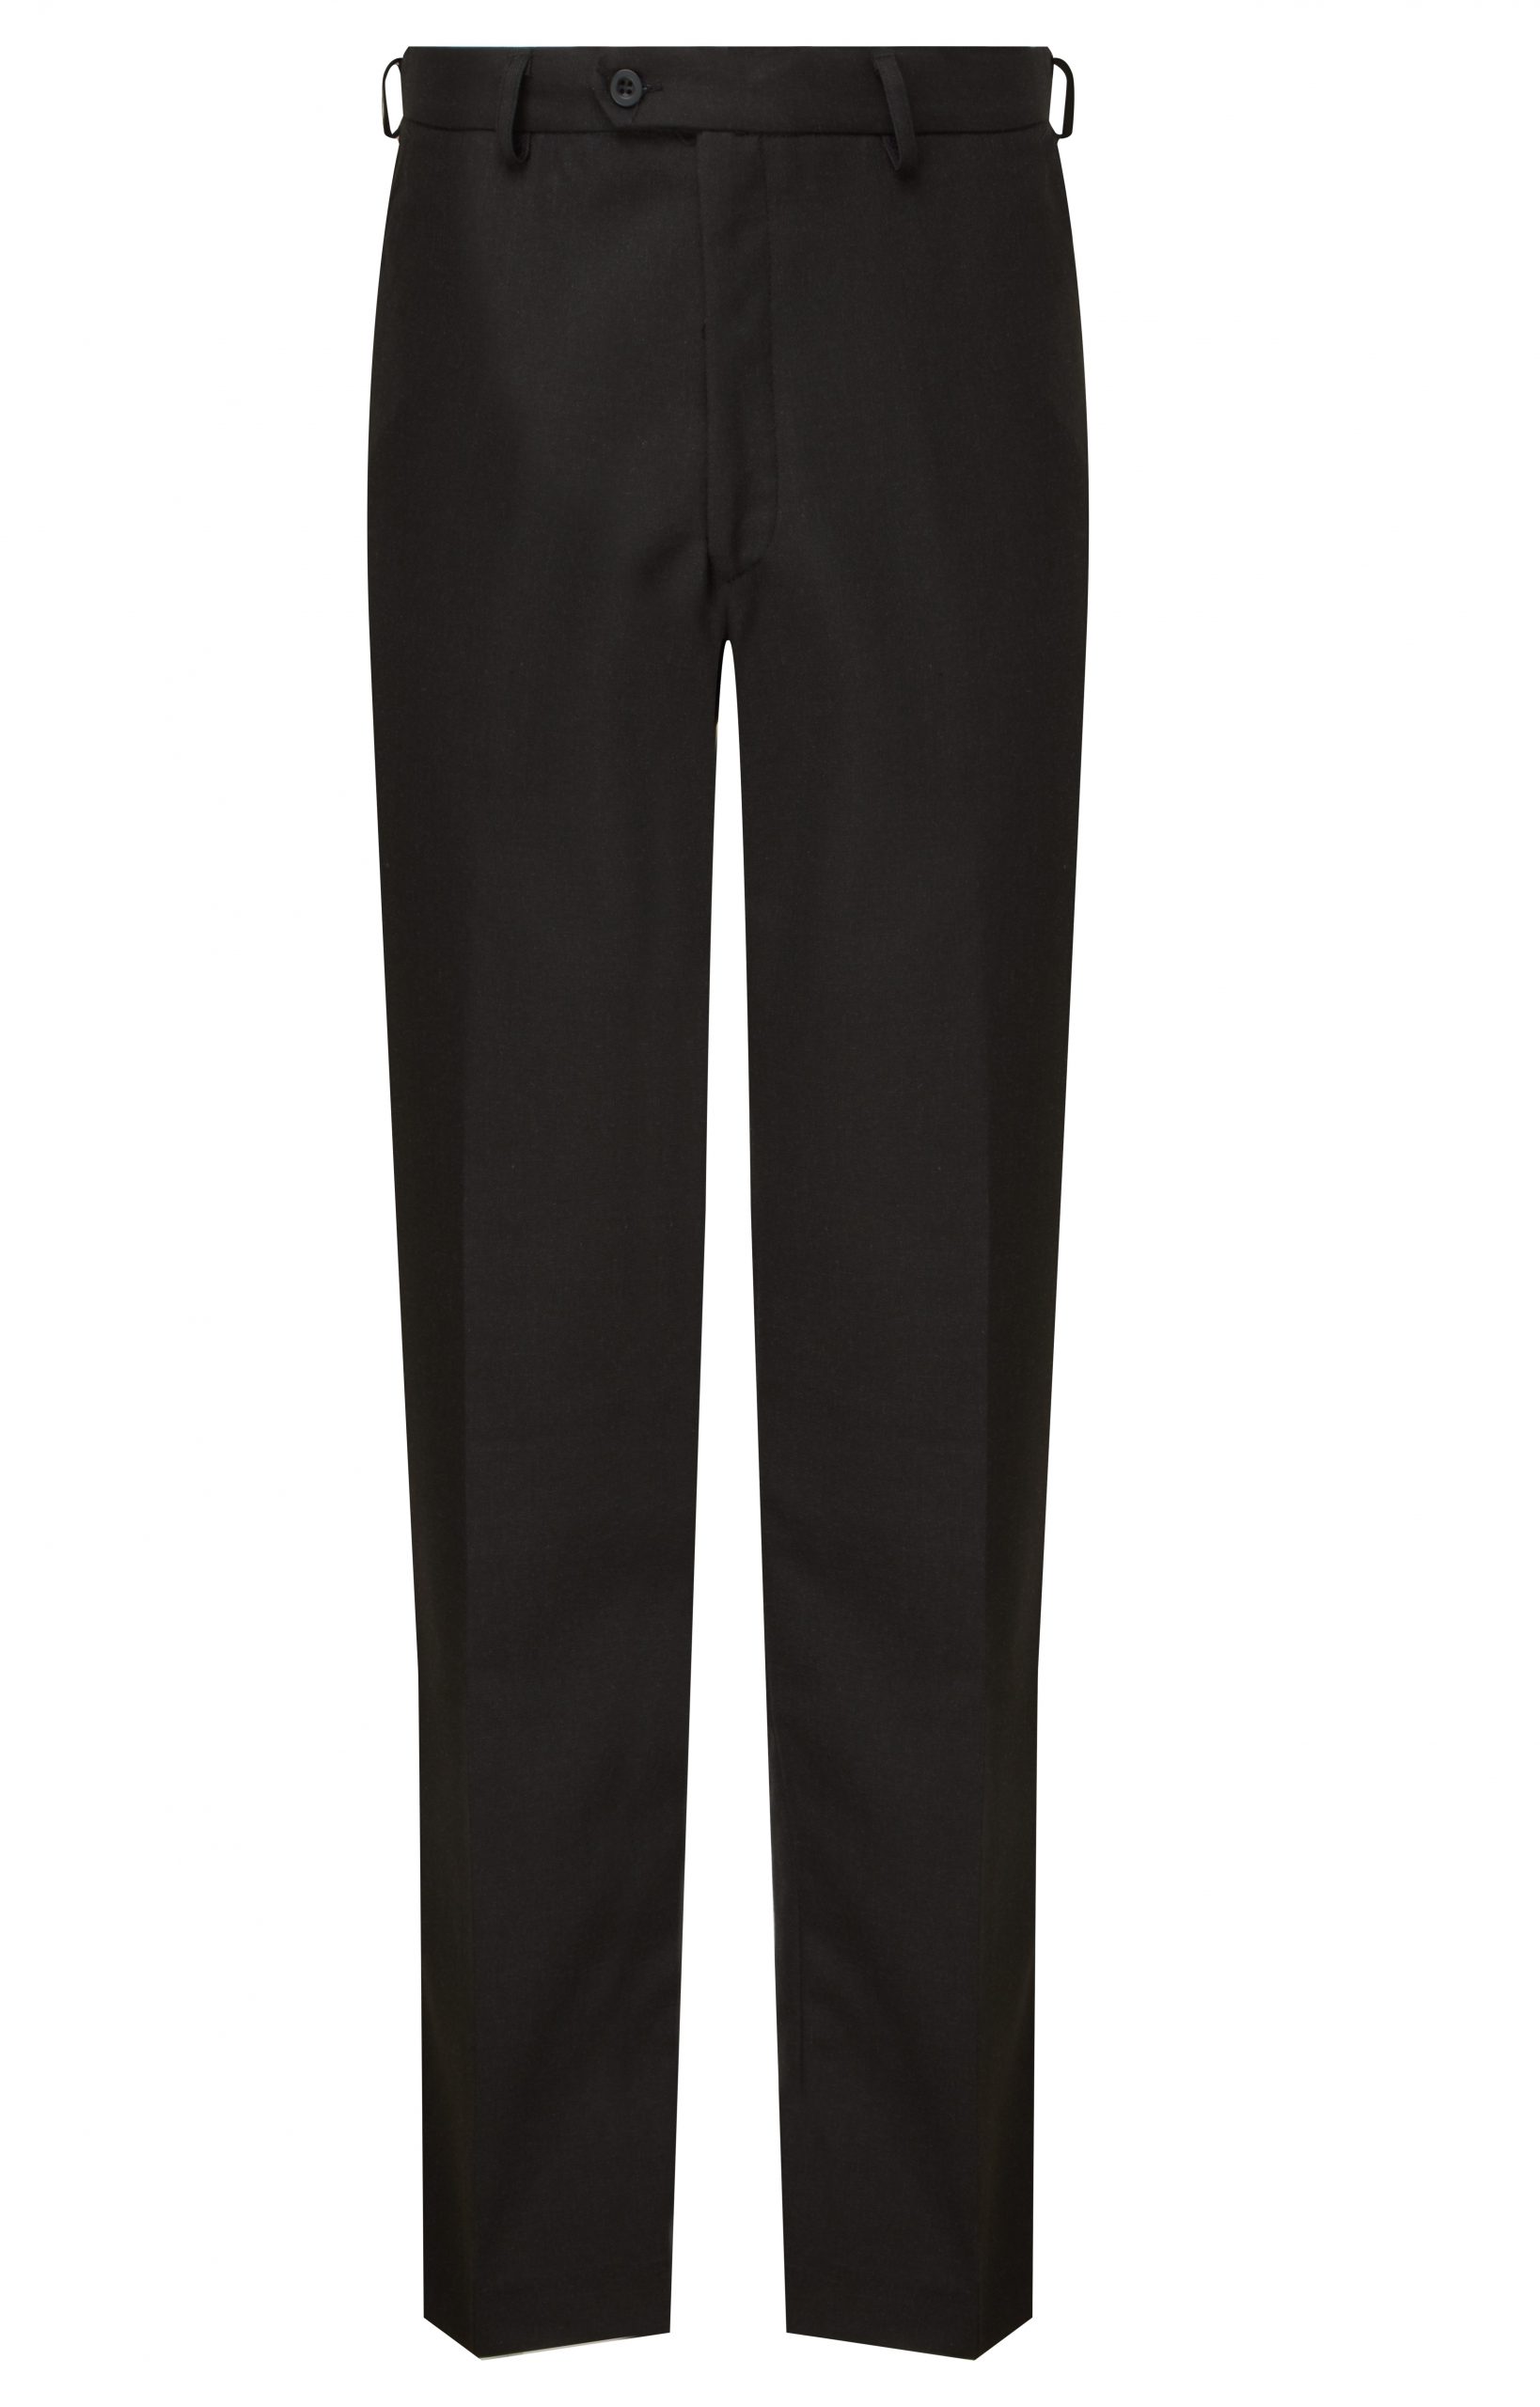 BOYS REGULAR TROUSERS - CHARCOAL - Cain of Heswall